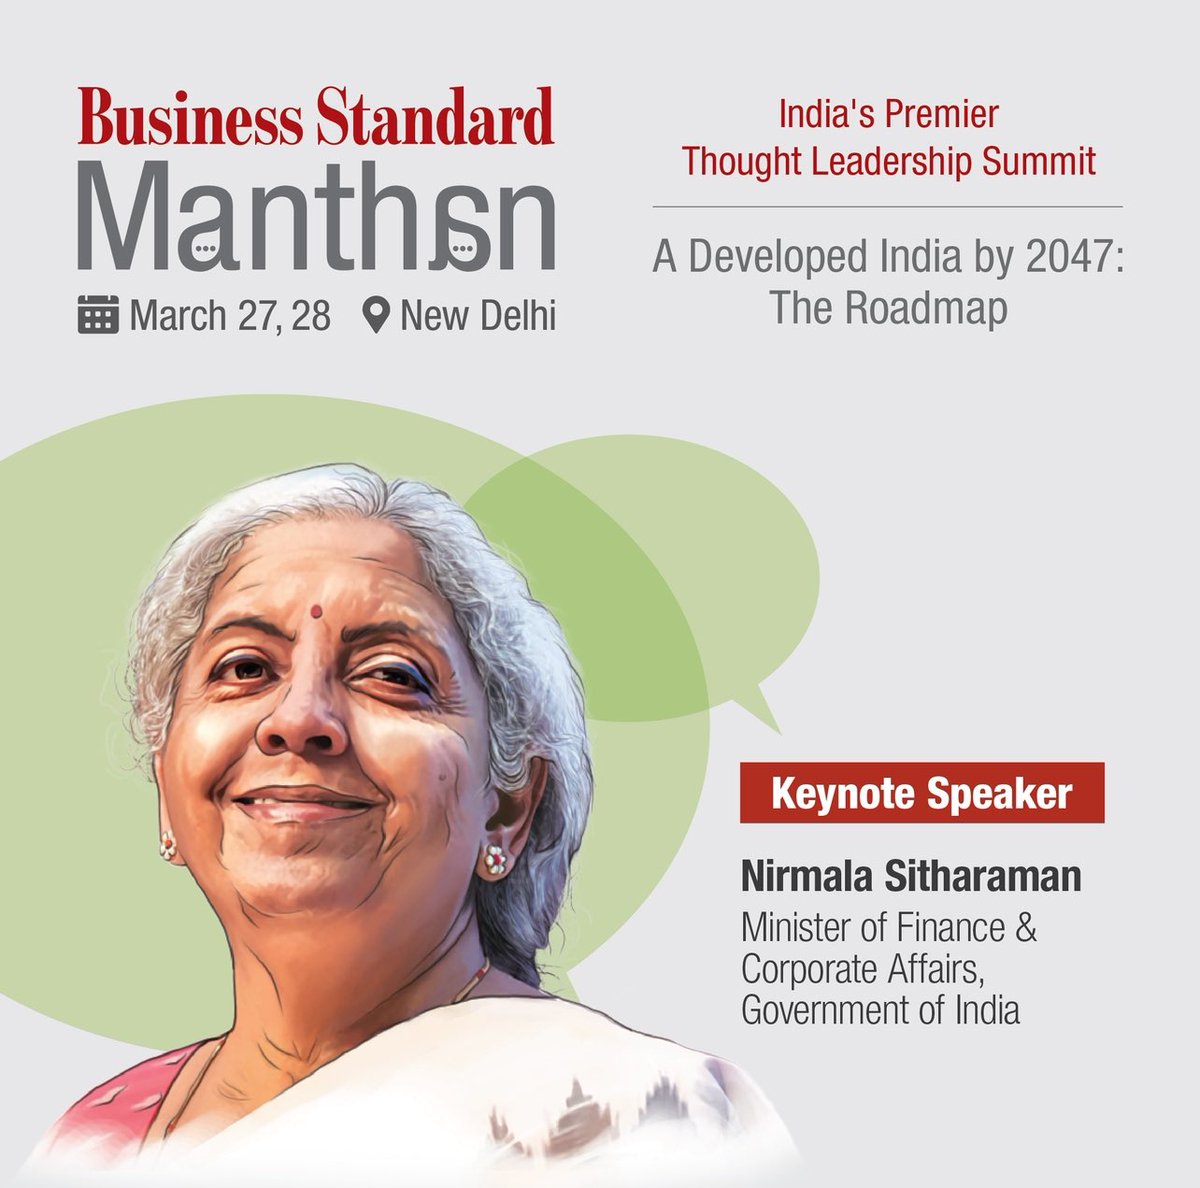 Join us as the Finance Minister @nsitharaman takes the stage to inaugurate the event with her keynote address and engage in a fireside chat with @AshokAkaybee discussing crucial economic matters shaping India's future. business-standard.com #bsmanthan #BSat50…